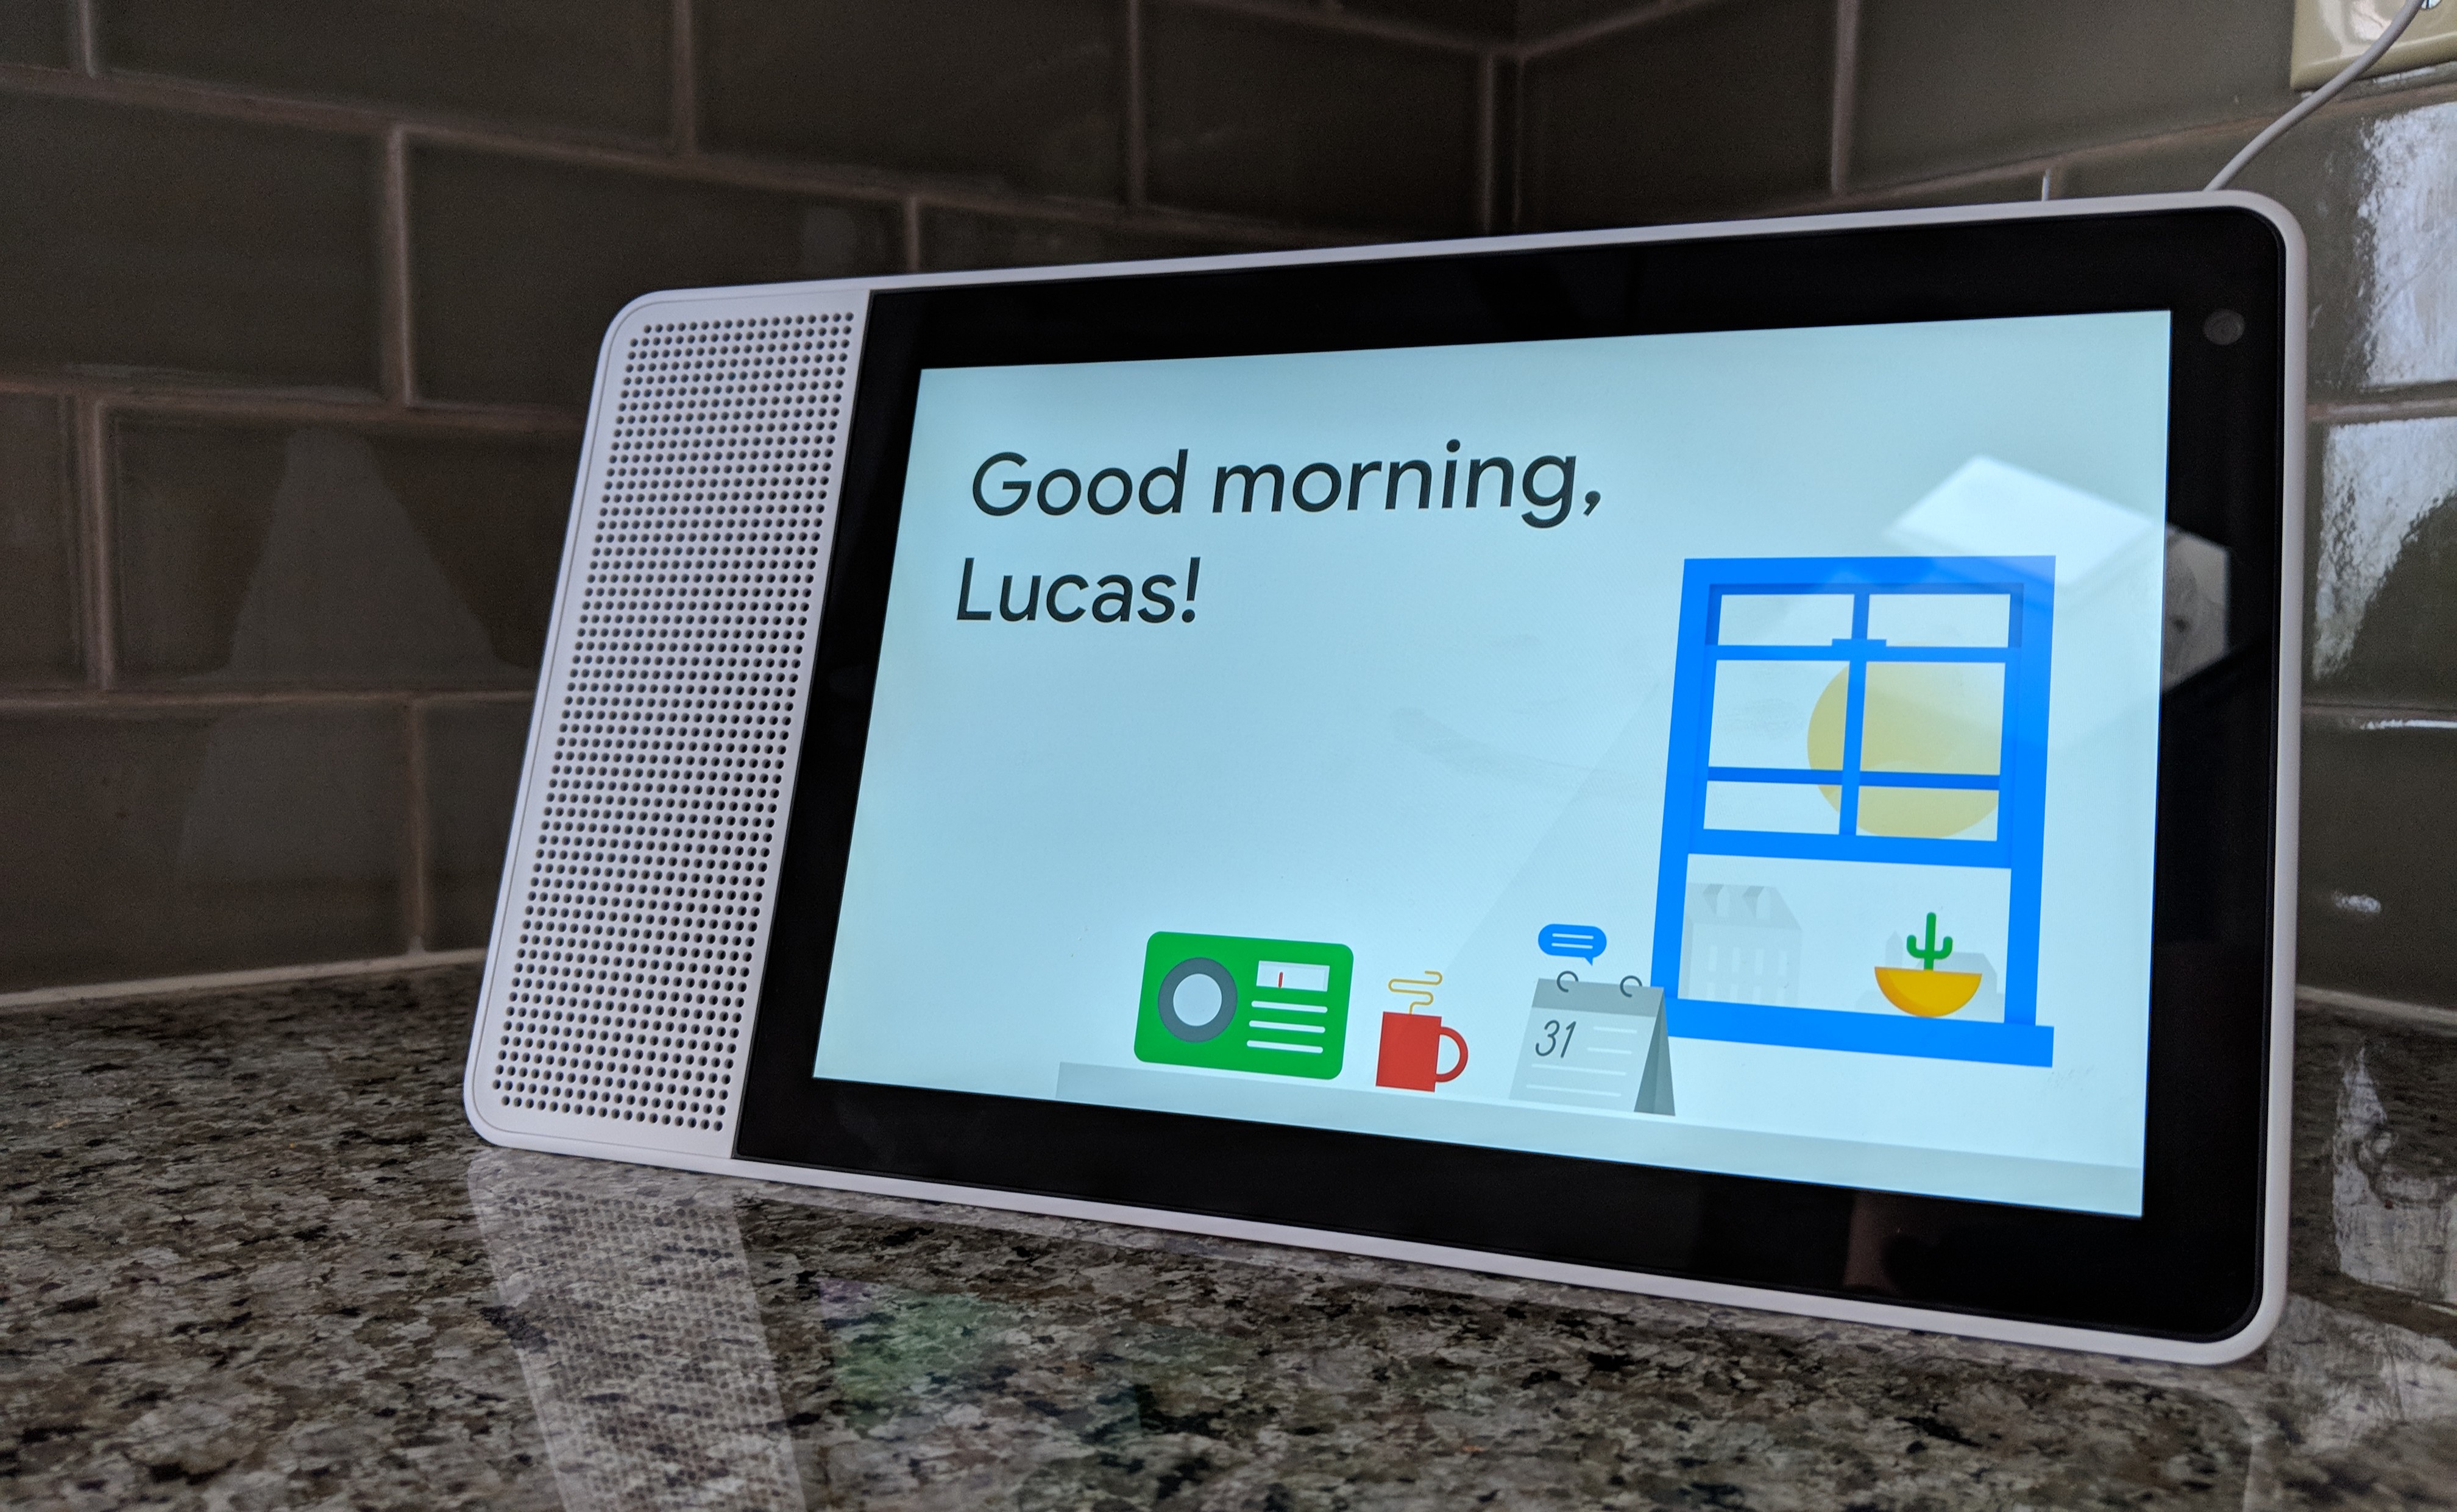 Hey Google, let's play a game” on your Smart Display